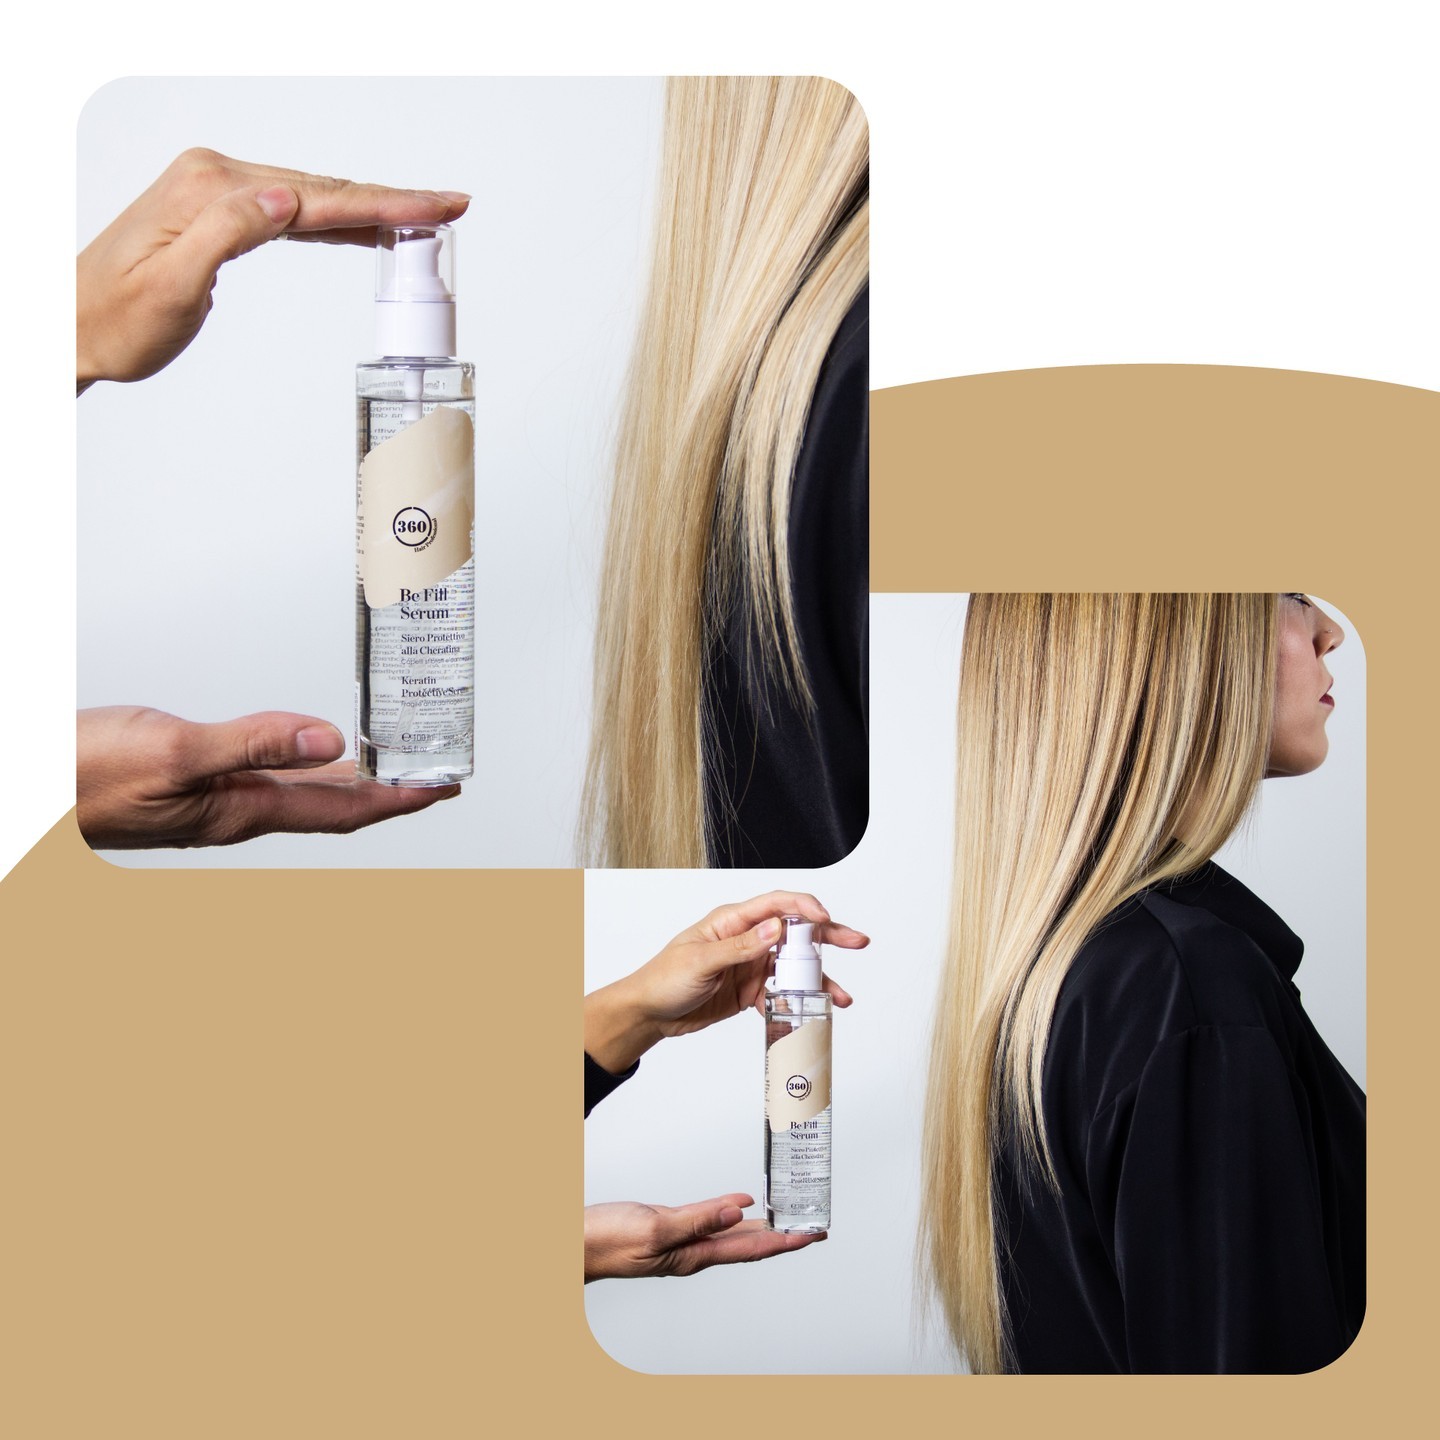 With #BeFill #Serum you can protect the hair against the assault of external agents and the high temperatures of straighteners and dryers. 🆘❌☔️. 🔜 💆‍♀️ 

Con il siero #BeFill puoi proteggere i capelli dall’aggressione degli agenti atmosferici e dalle alte temperature di asciugacapelli e piastre. 🆘❌☔️. 🔜 💆‍♀️

#360 #hairprofessional #protection #treatment #beautifulhair